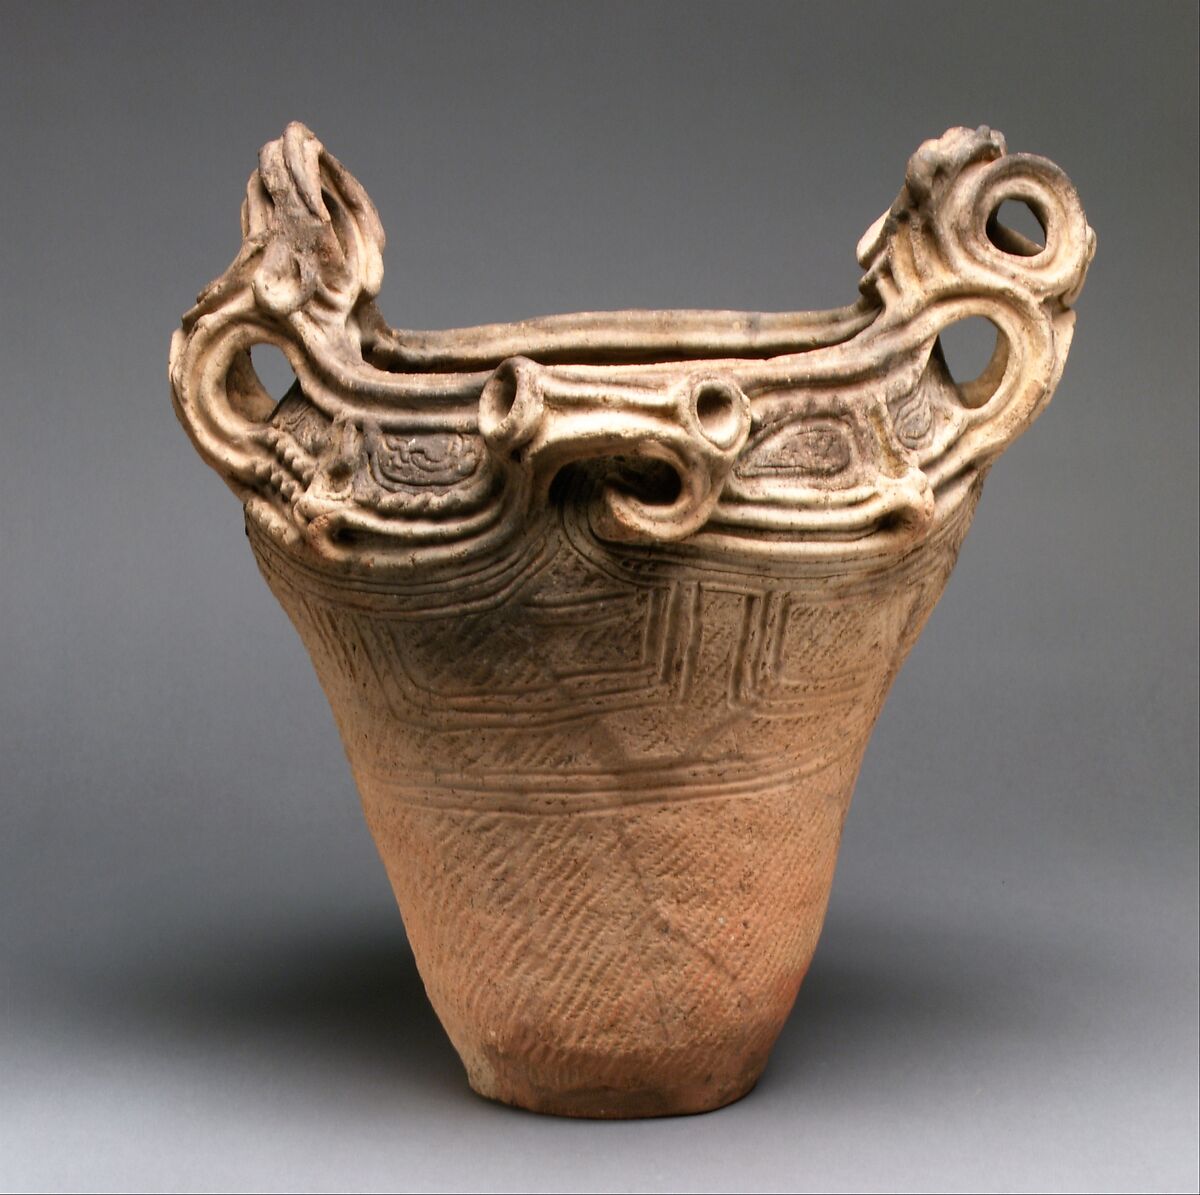 “Flame-rimmed” deep bowl (kaen doki), Earthenware with cord-marked and incised decoration, Japan 